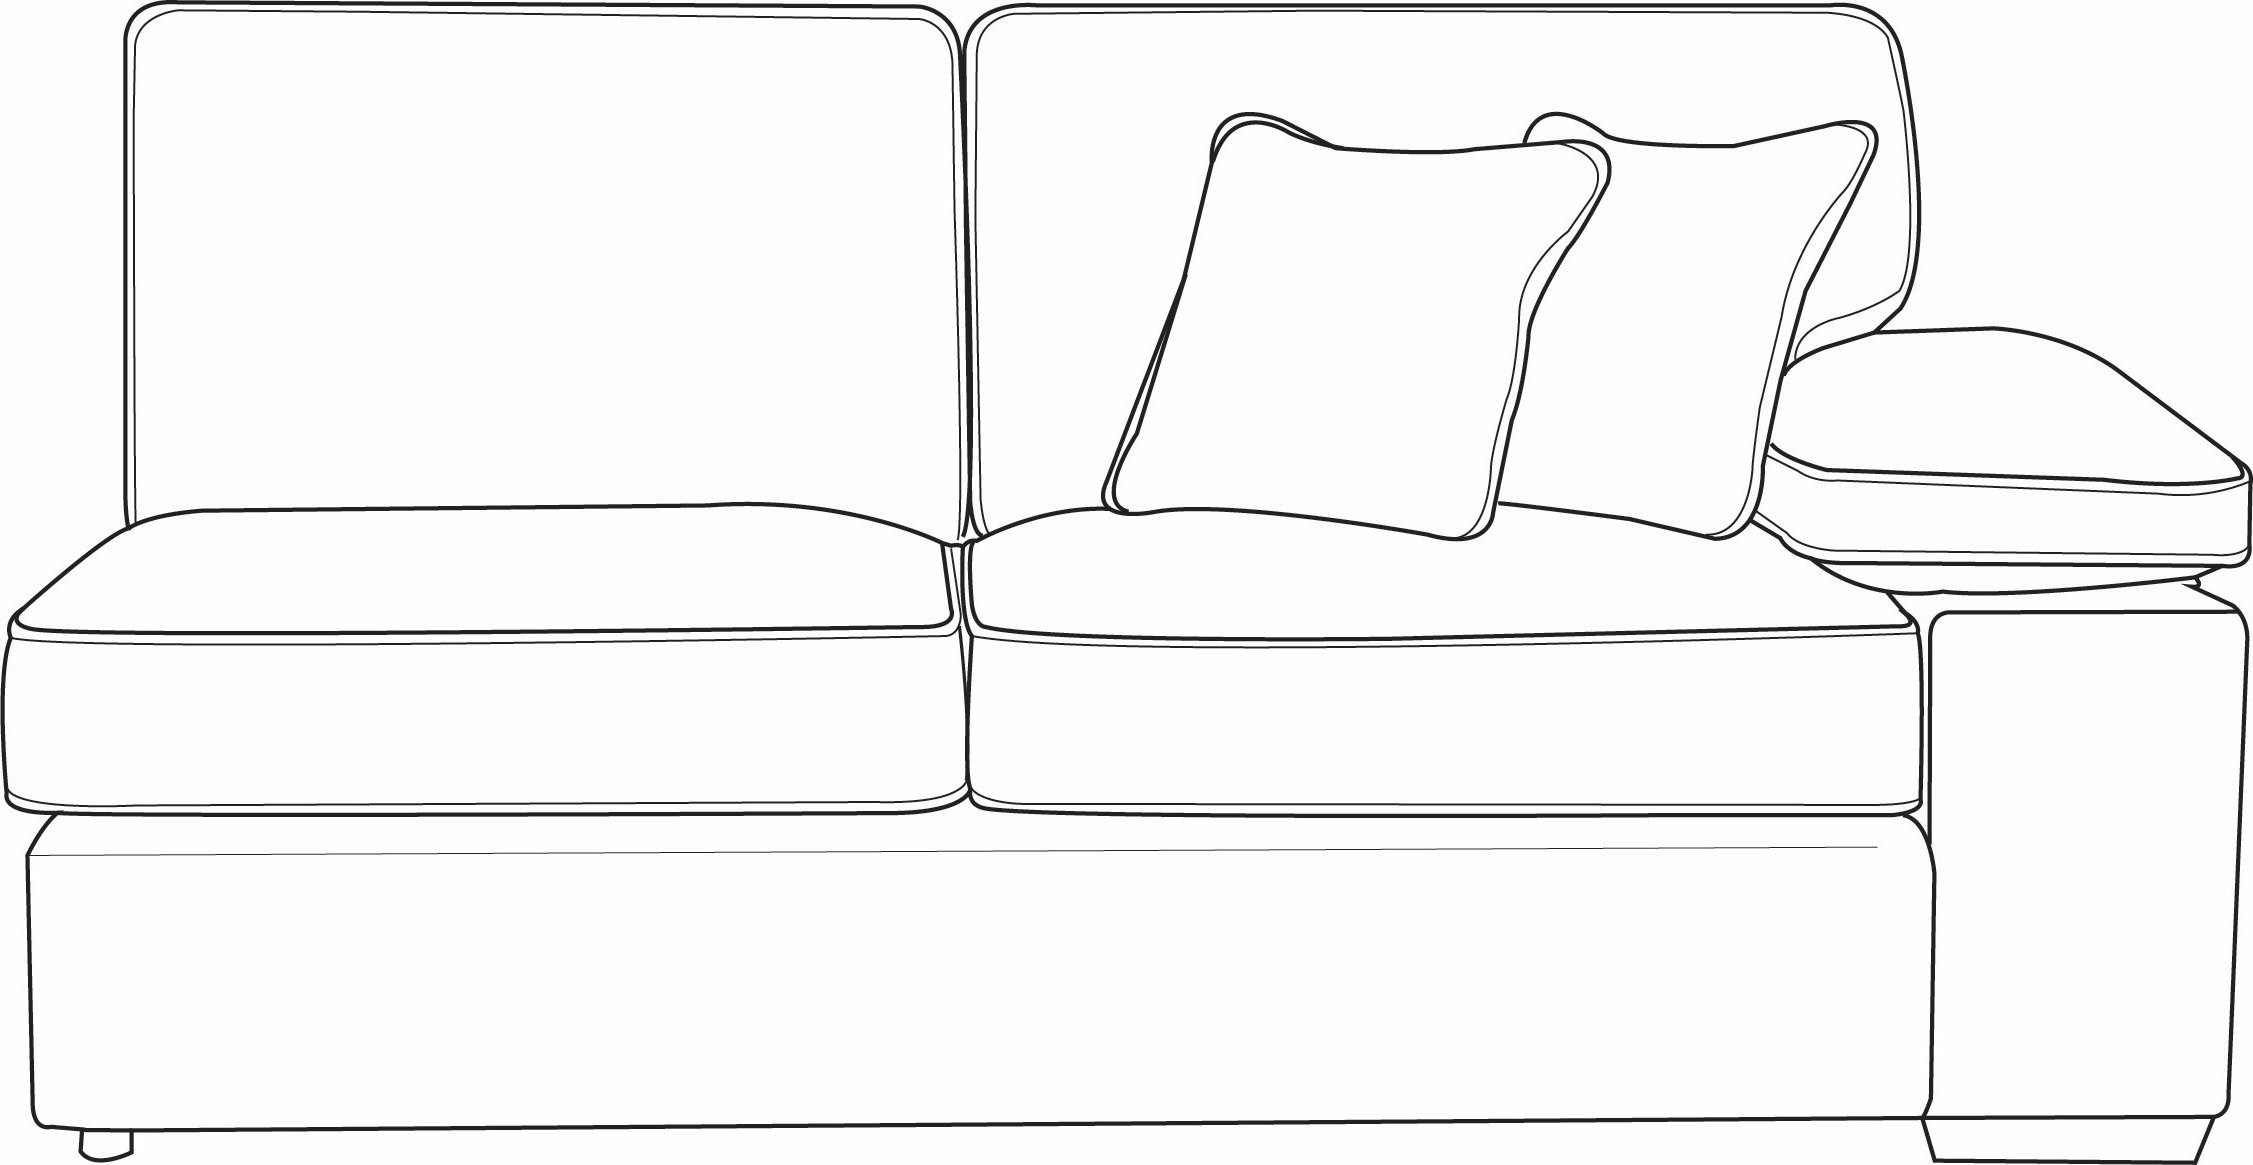 Right 2 Seater Sofa Section